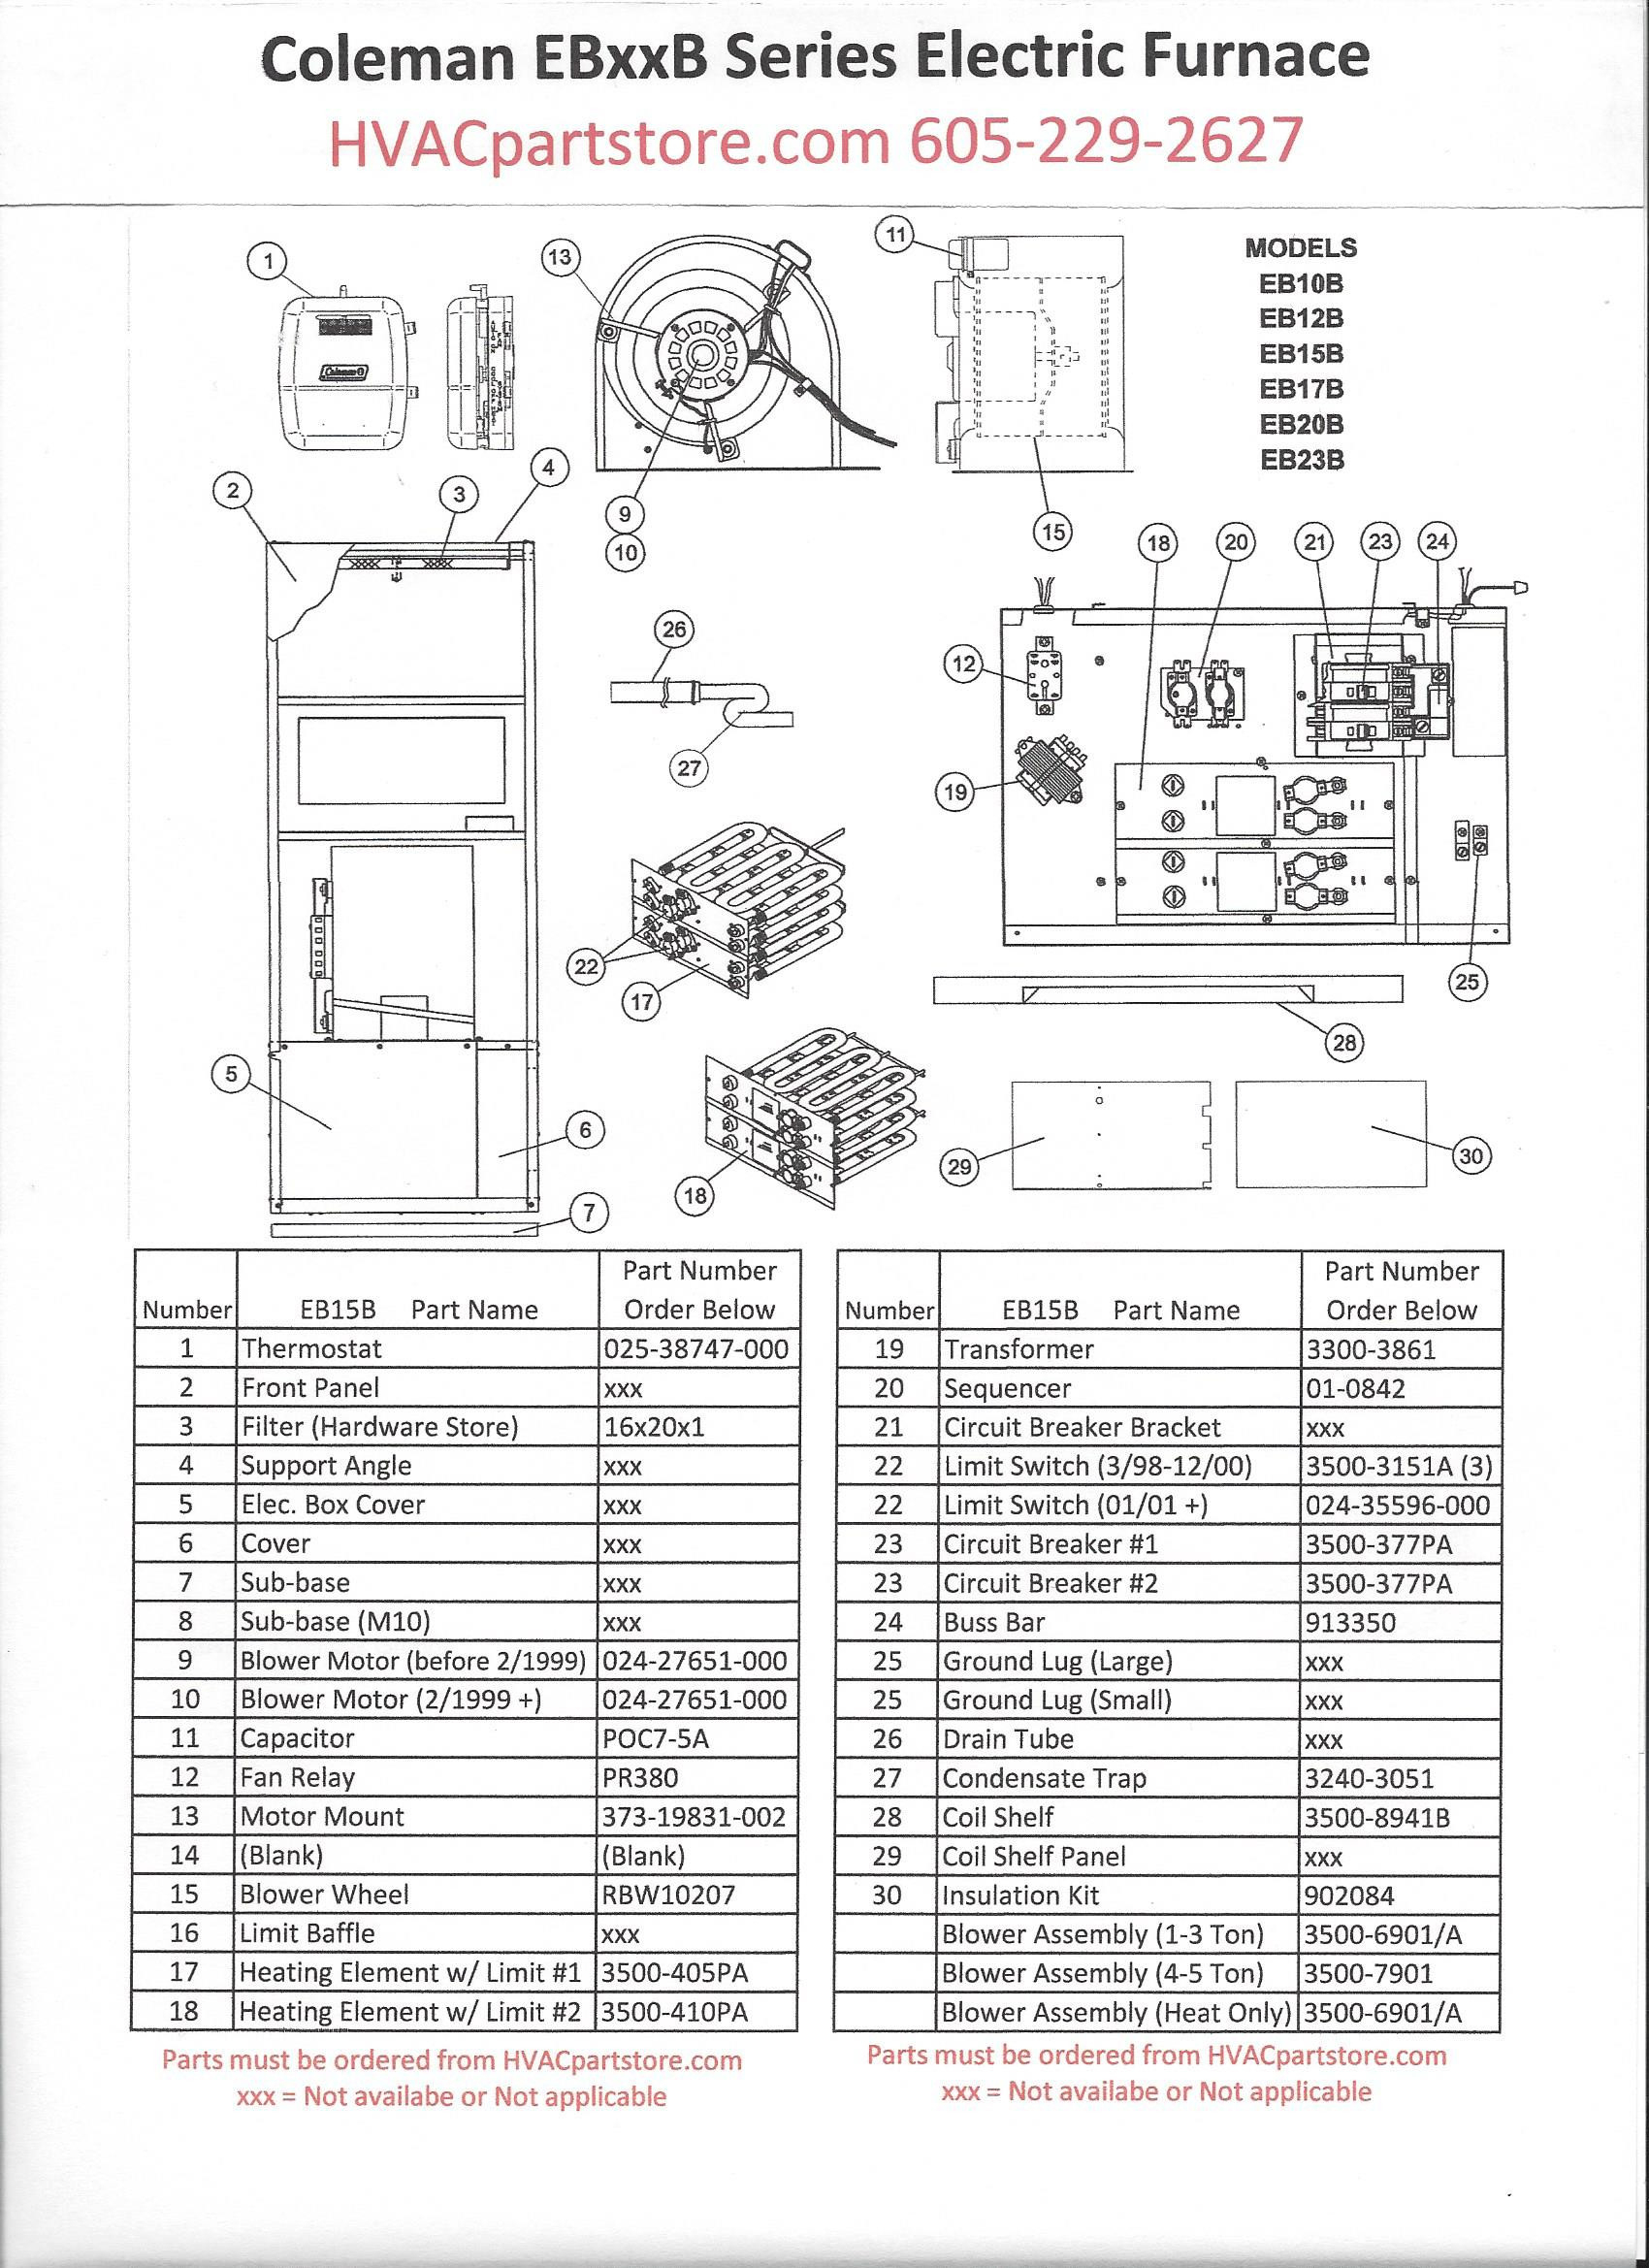 Atwood Water Heater Dsi Wiring Diagram - Atwood Water Heater Wiring Diagram